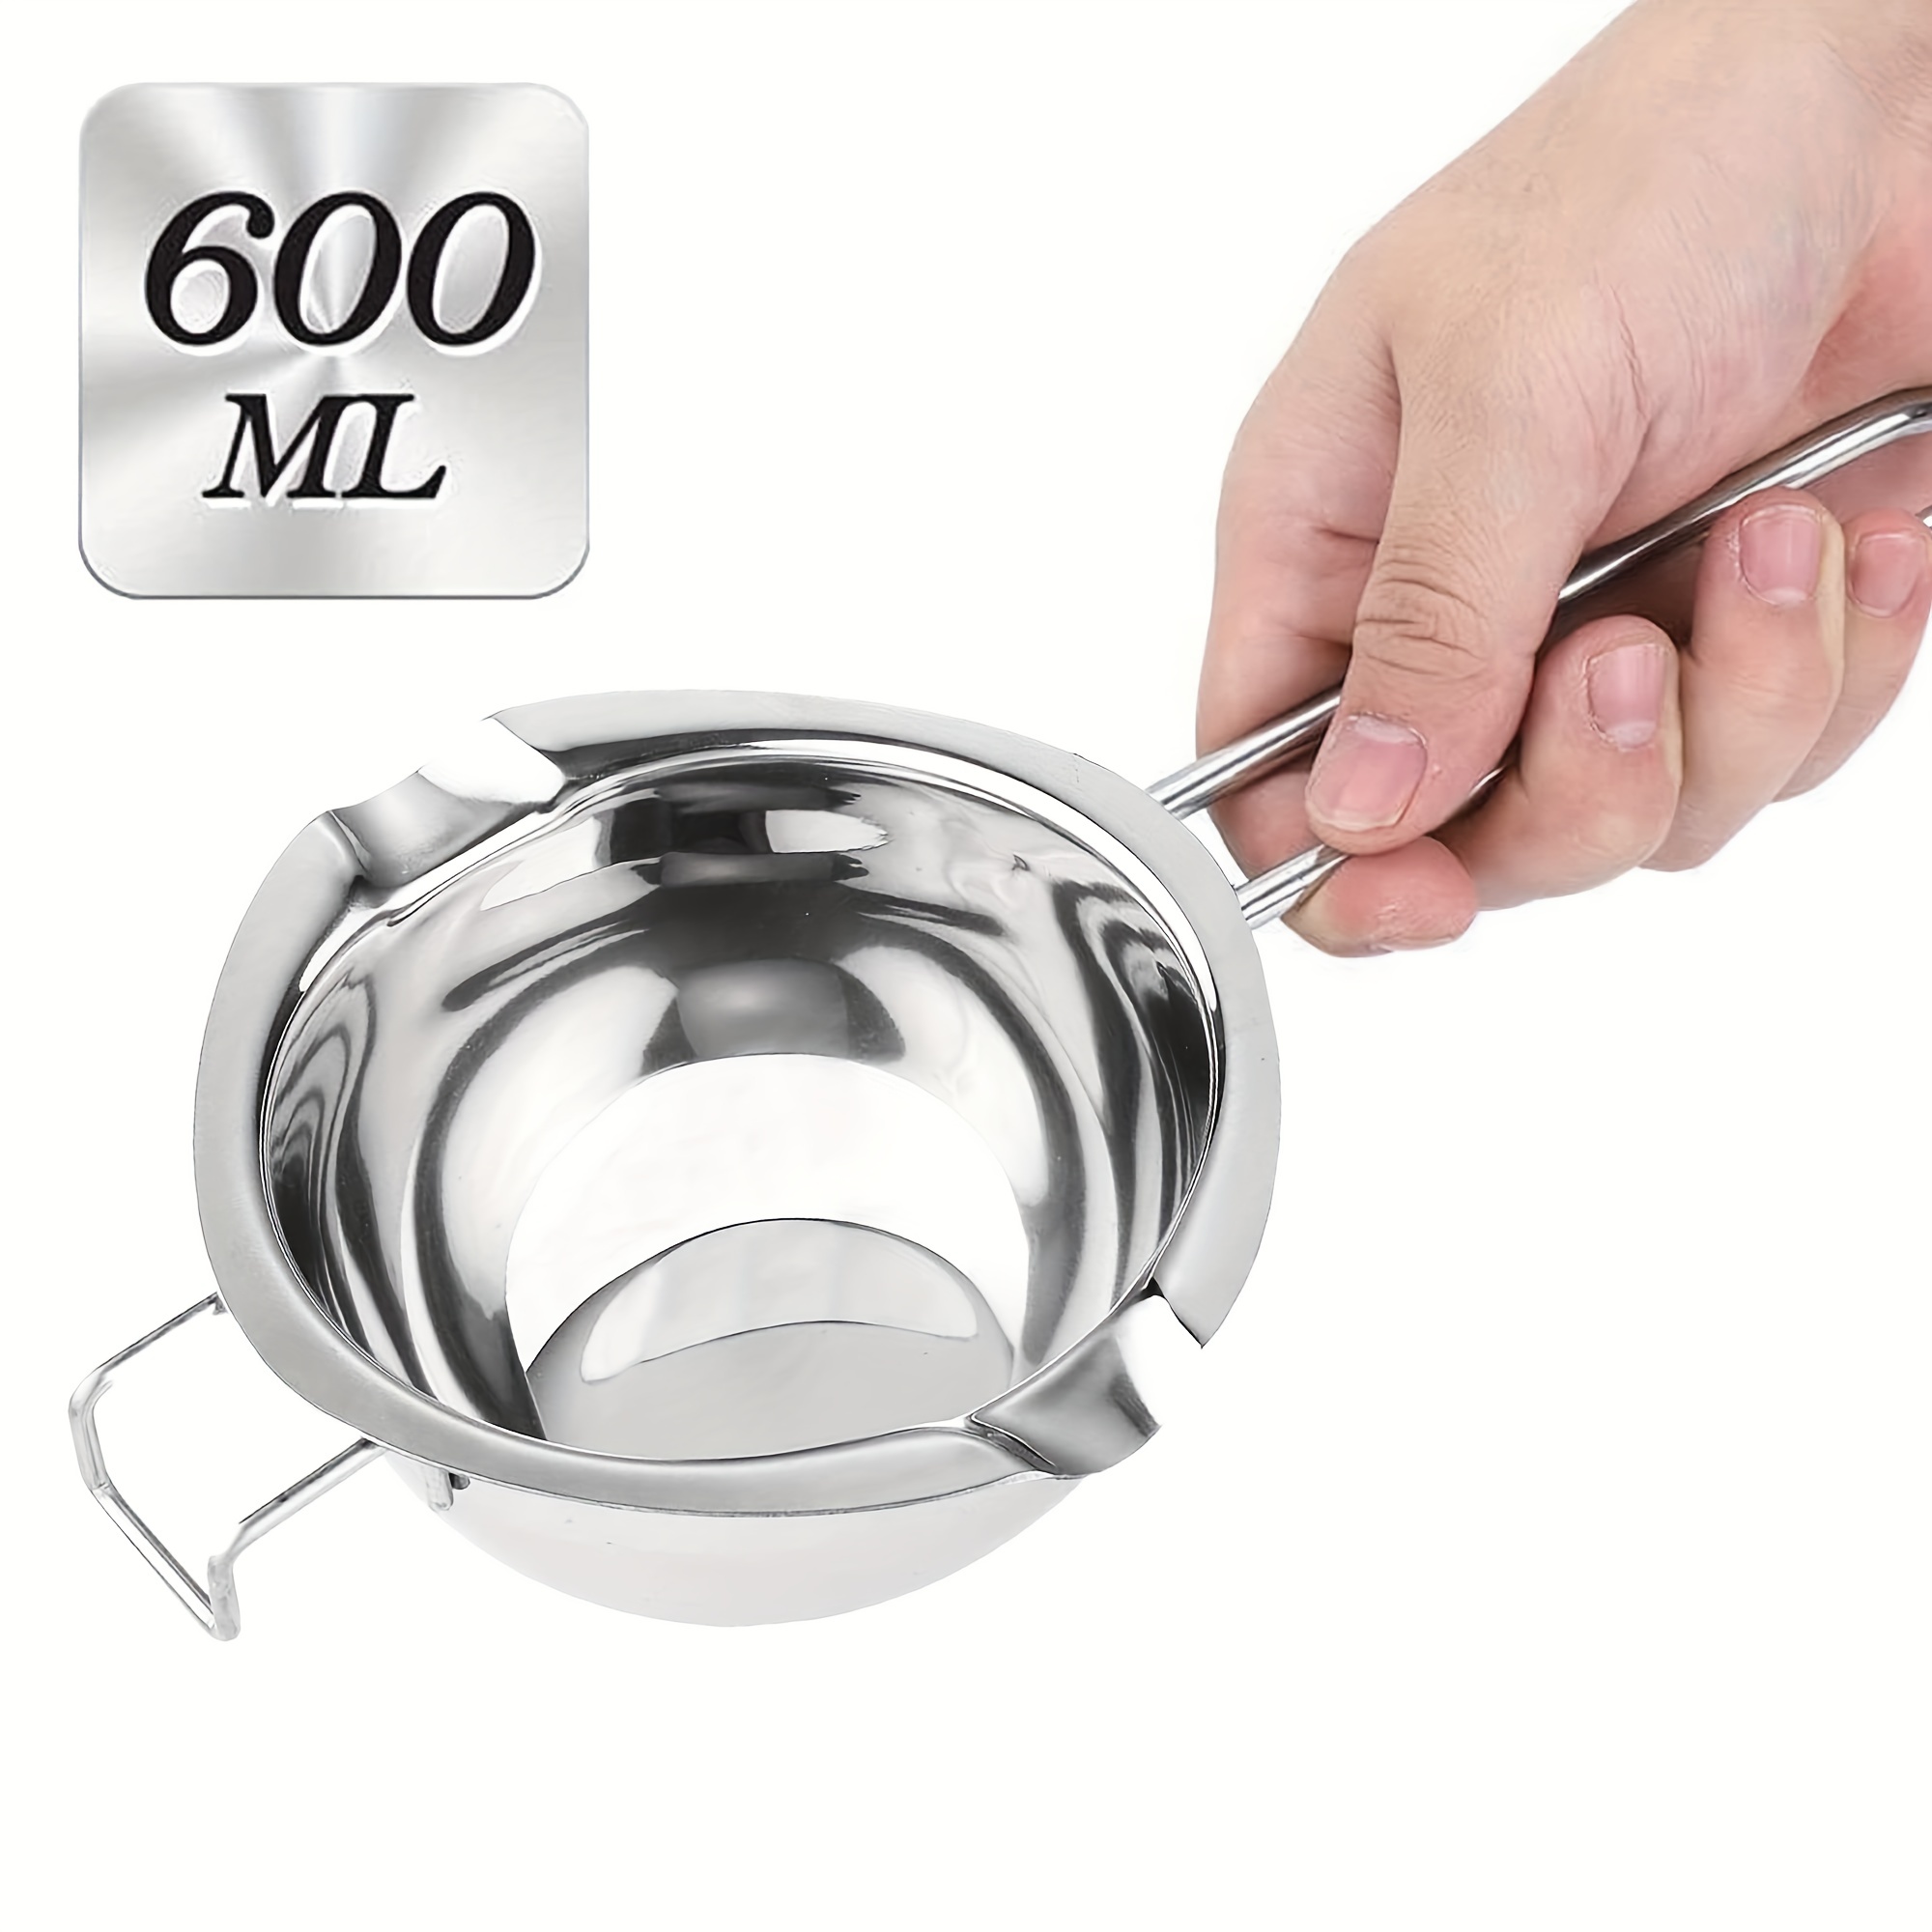 Double Boiler Pot Set Stainless Steel Melting Pot For Melting Chocolate Soap  Wax Candle Making 600